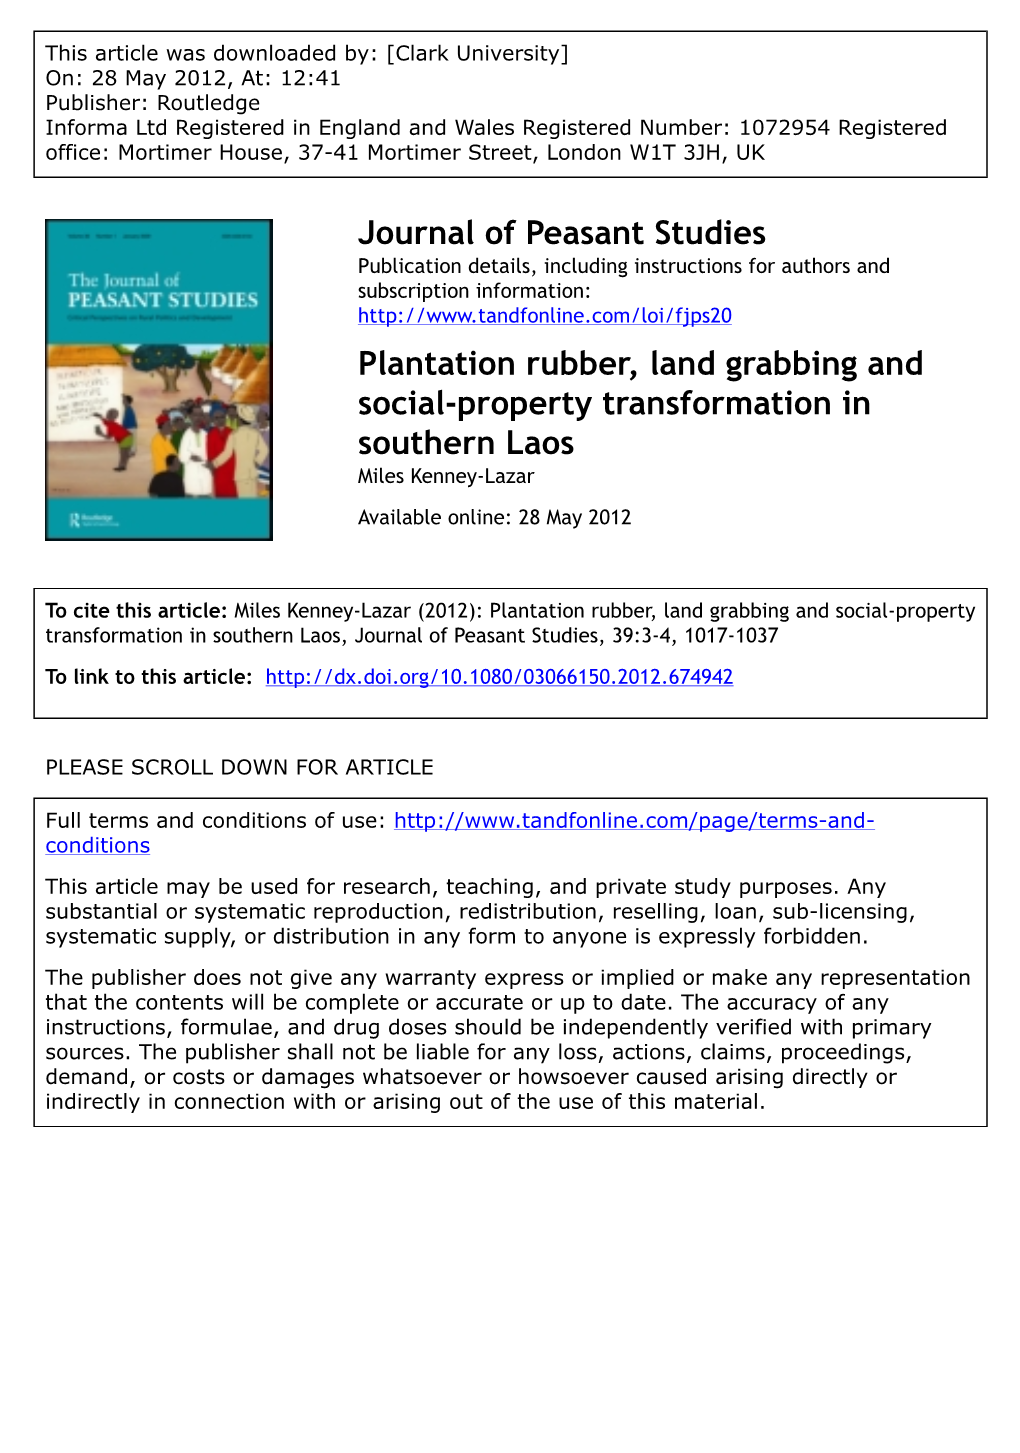 Plantation Rubber, Land Grabbing and Social-Property Transformation in Southern Laos Miles Kenney-Lazar Available Online: 28 May 2012